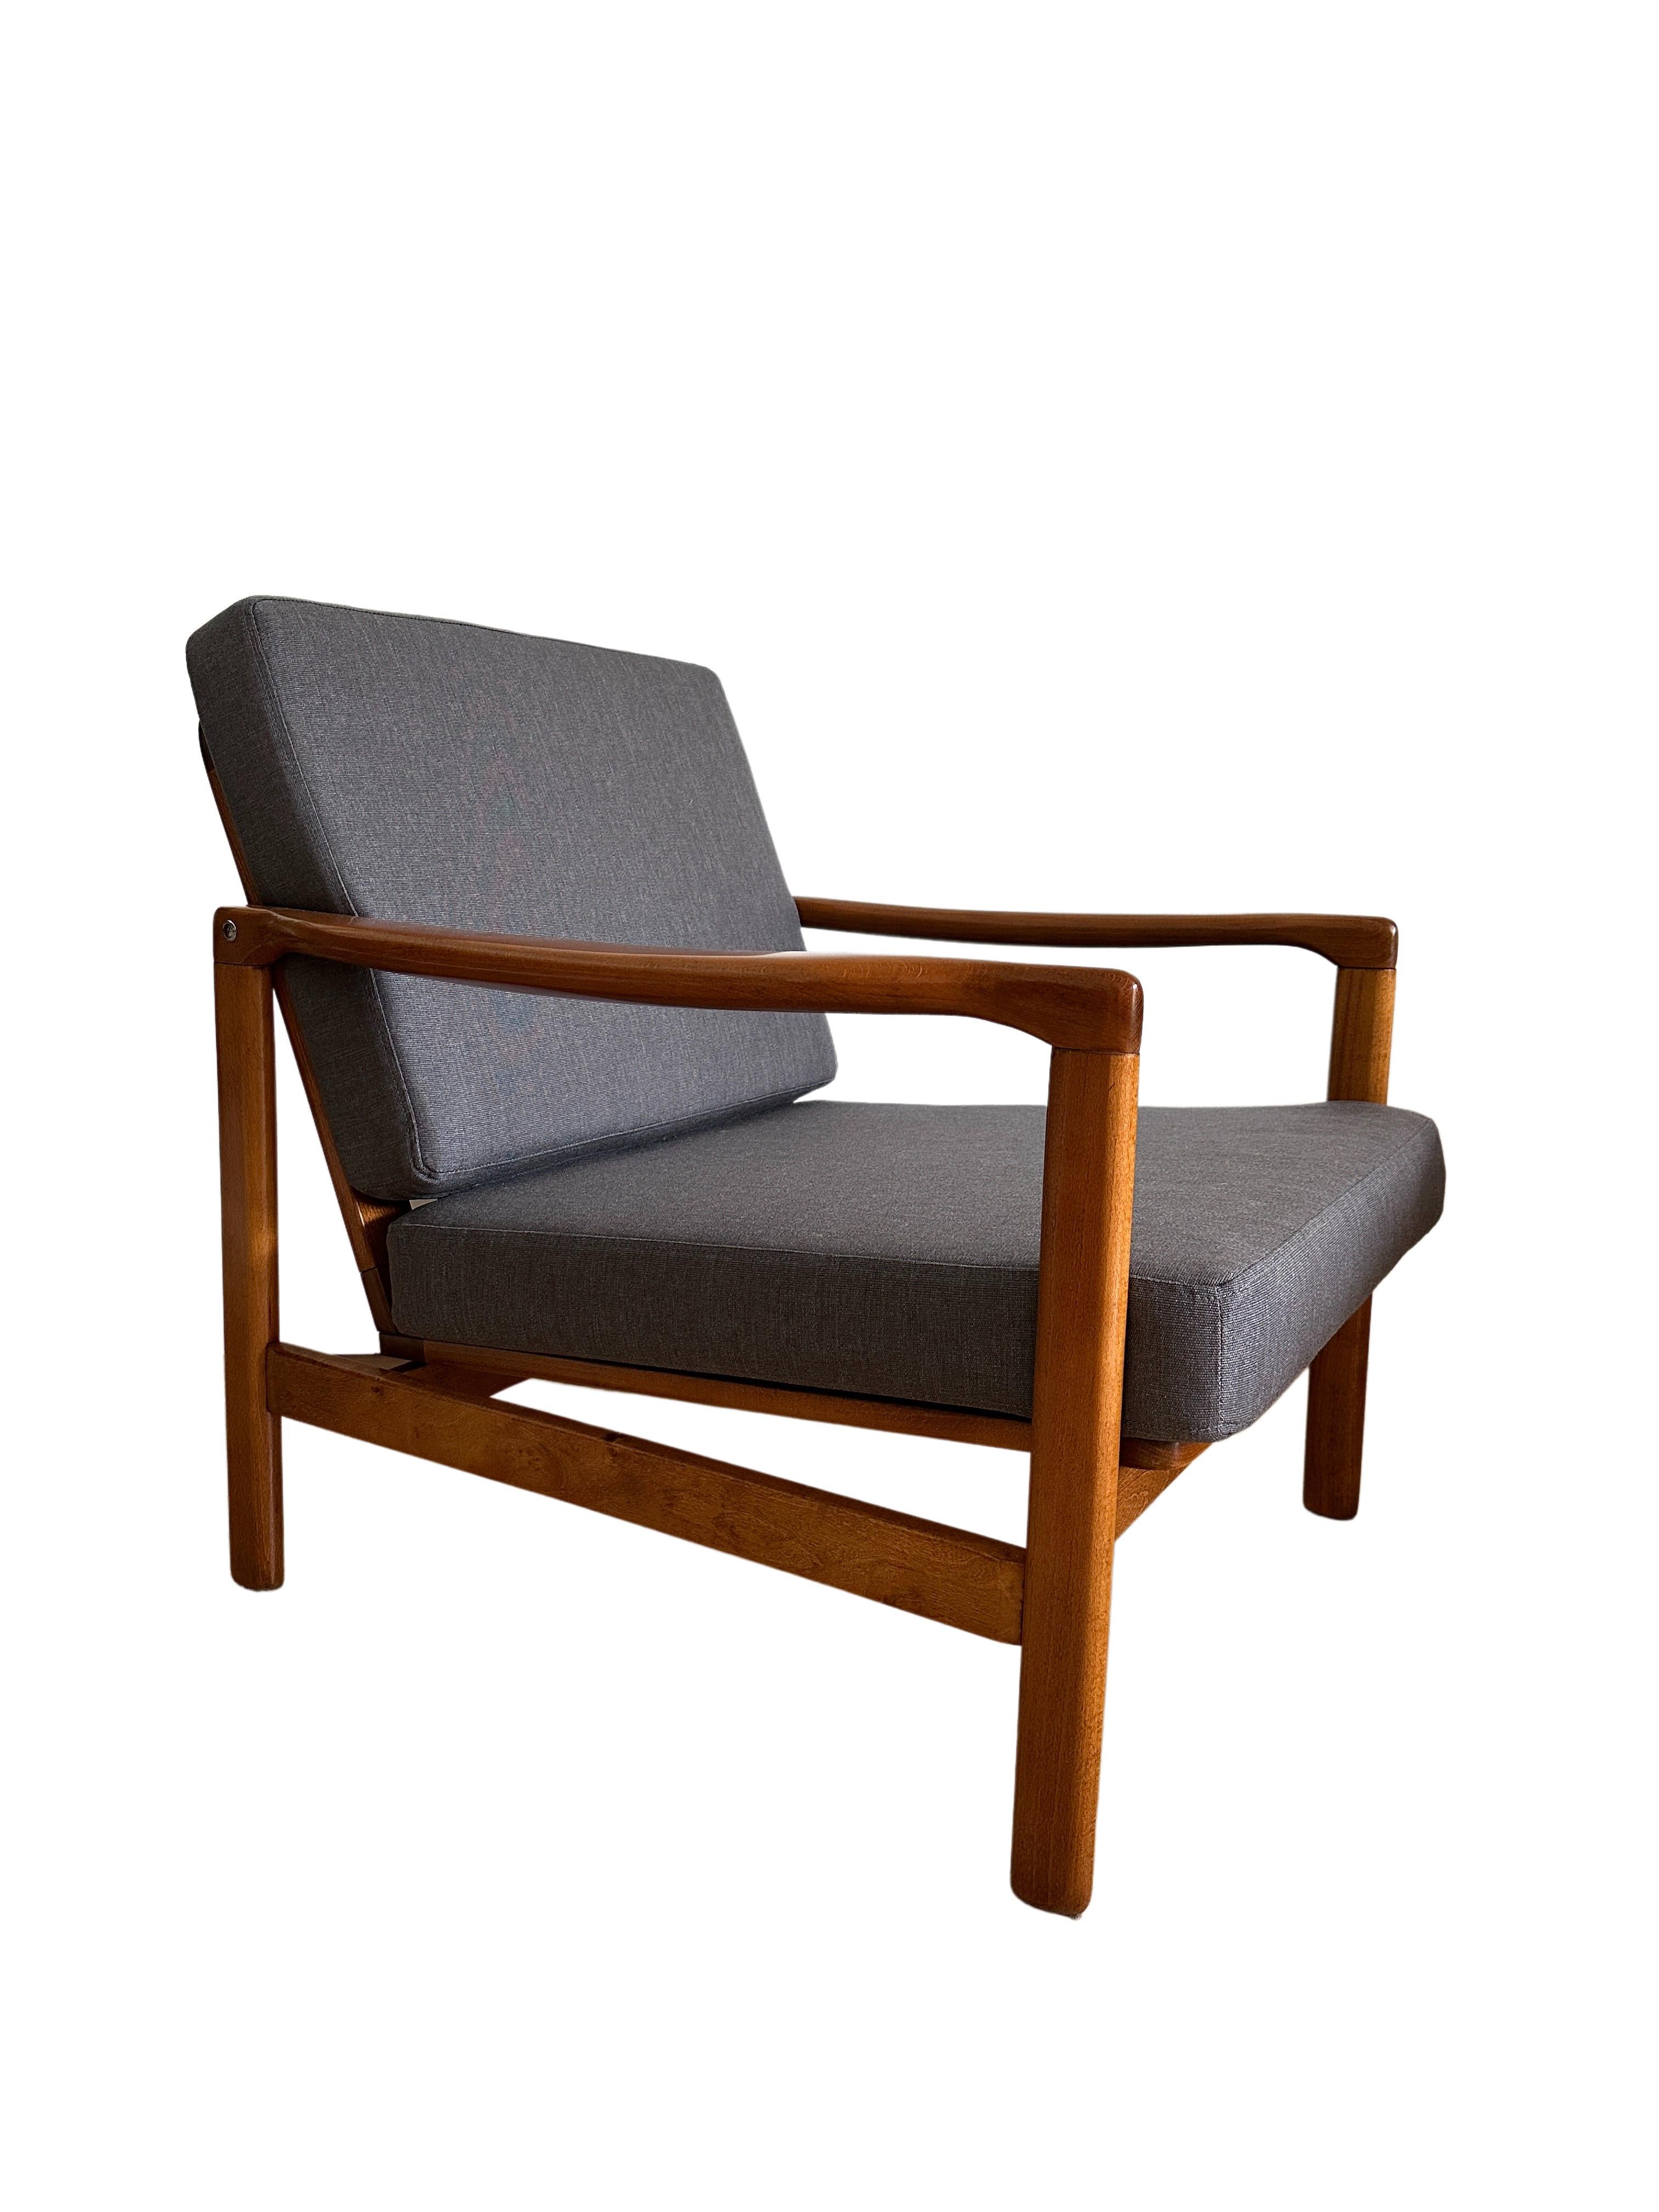 Mid-Century Armchair, Wood and Grey Kvadrat Upholstery, Europe, 1960s For Sale 1